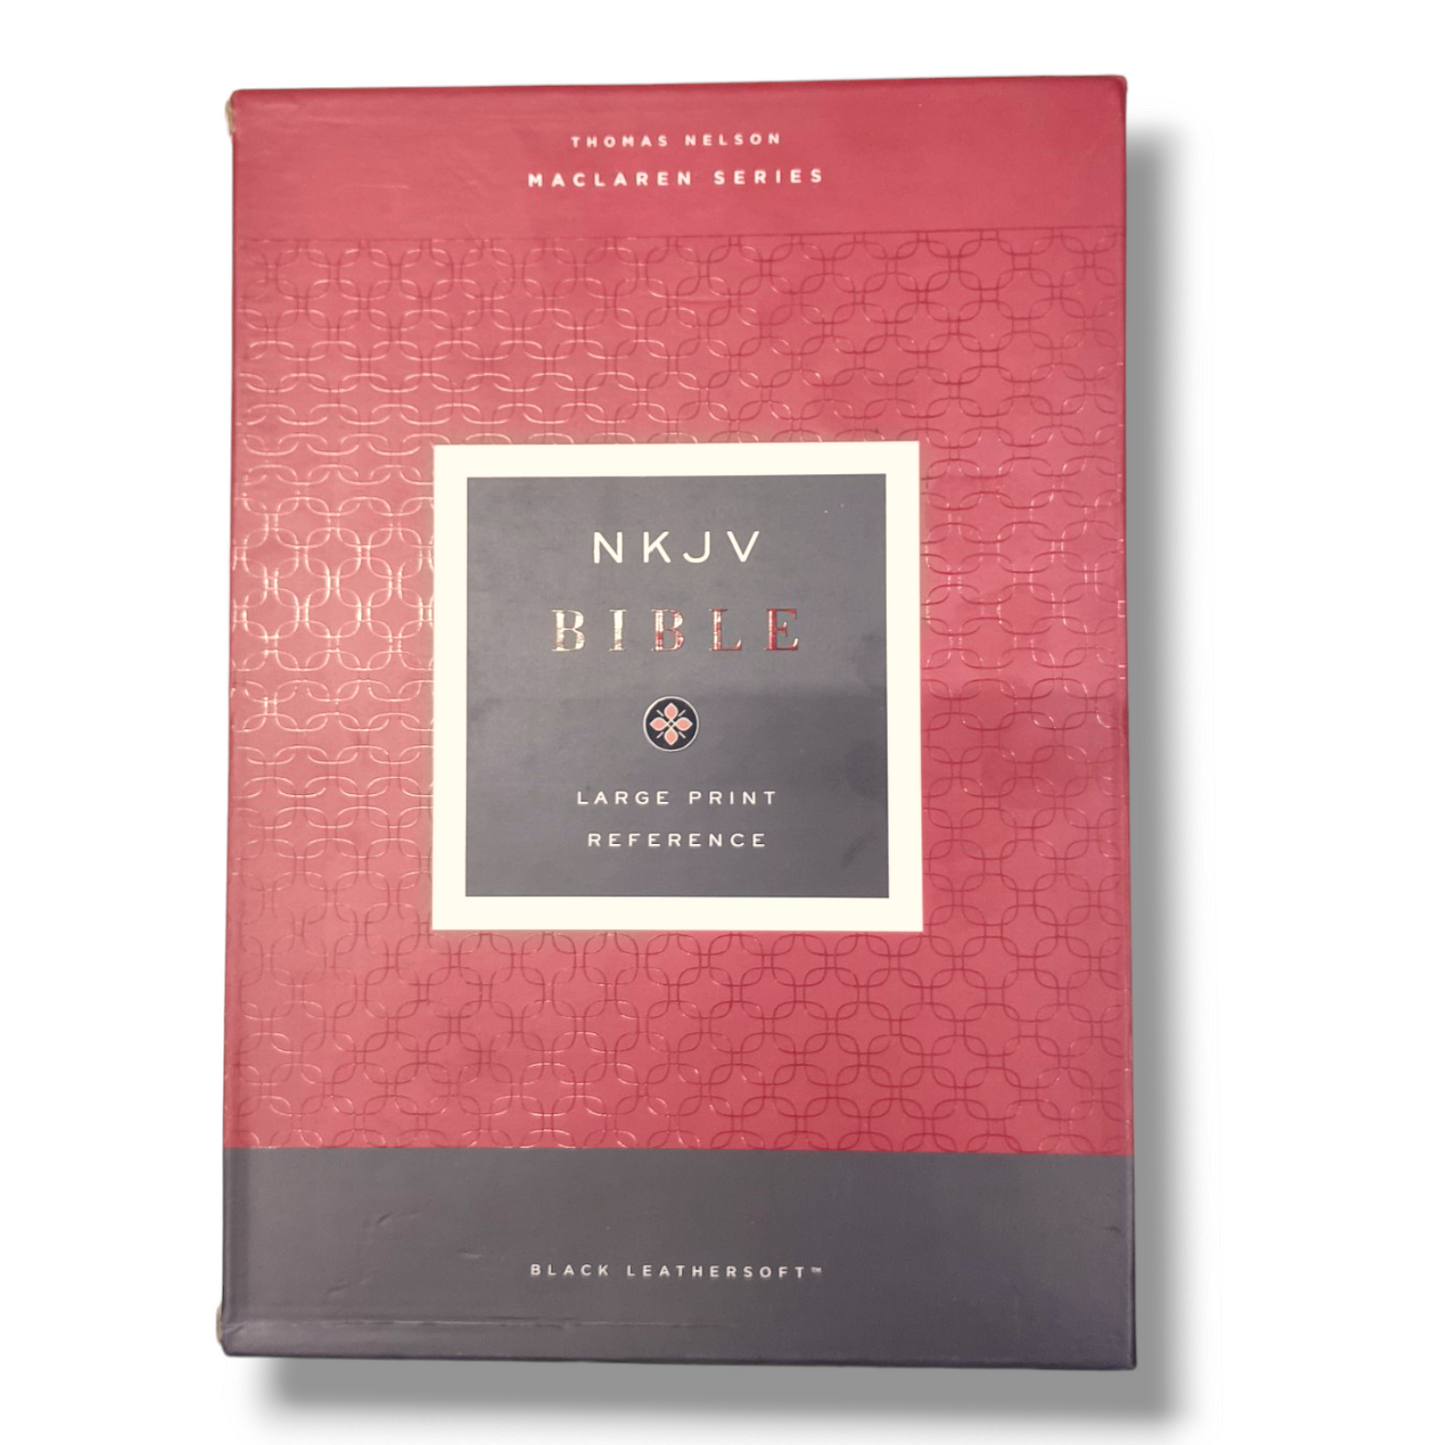 NKJV, Large Print Verse-by-Verse Reference Bible | Maclaren Series | Leathersoft, Black Cover | Comfort Print | New King James Version